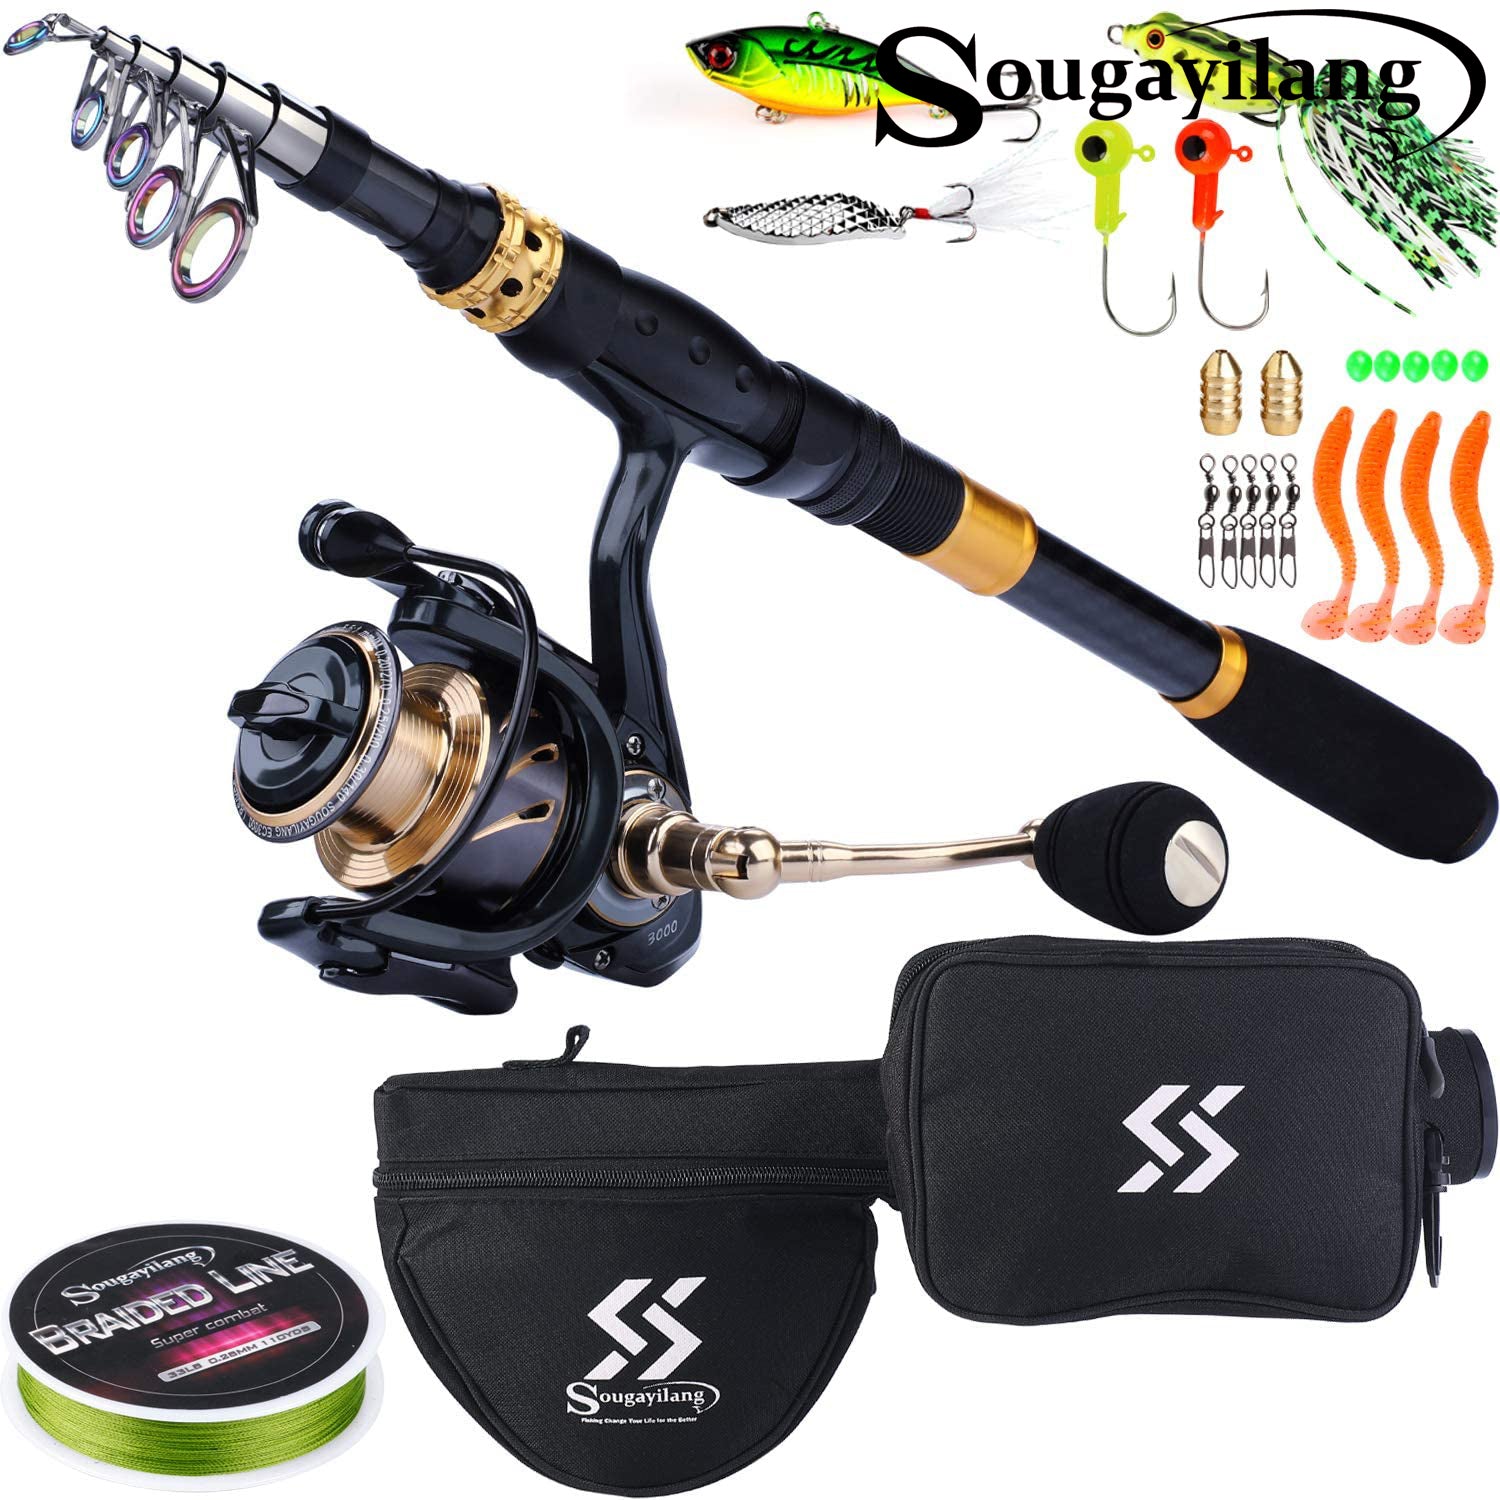 Sougayilang Fishing Rod and Reel Combos Carbon Fiber Telescopic Fishing  Pole and 12 +1 BB Spinning Reel with Carrying Case for Saltwater and Freshwater  Fishing Gear Kit